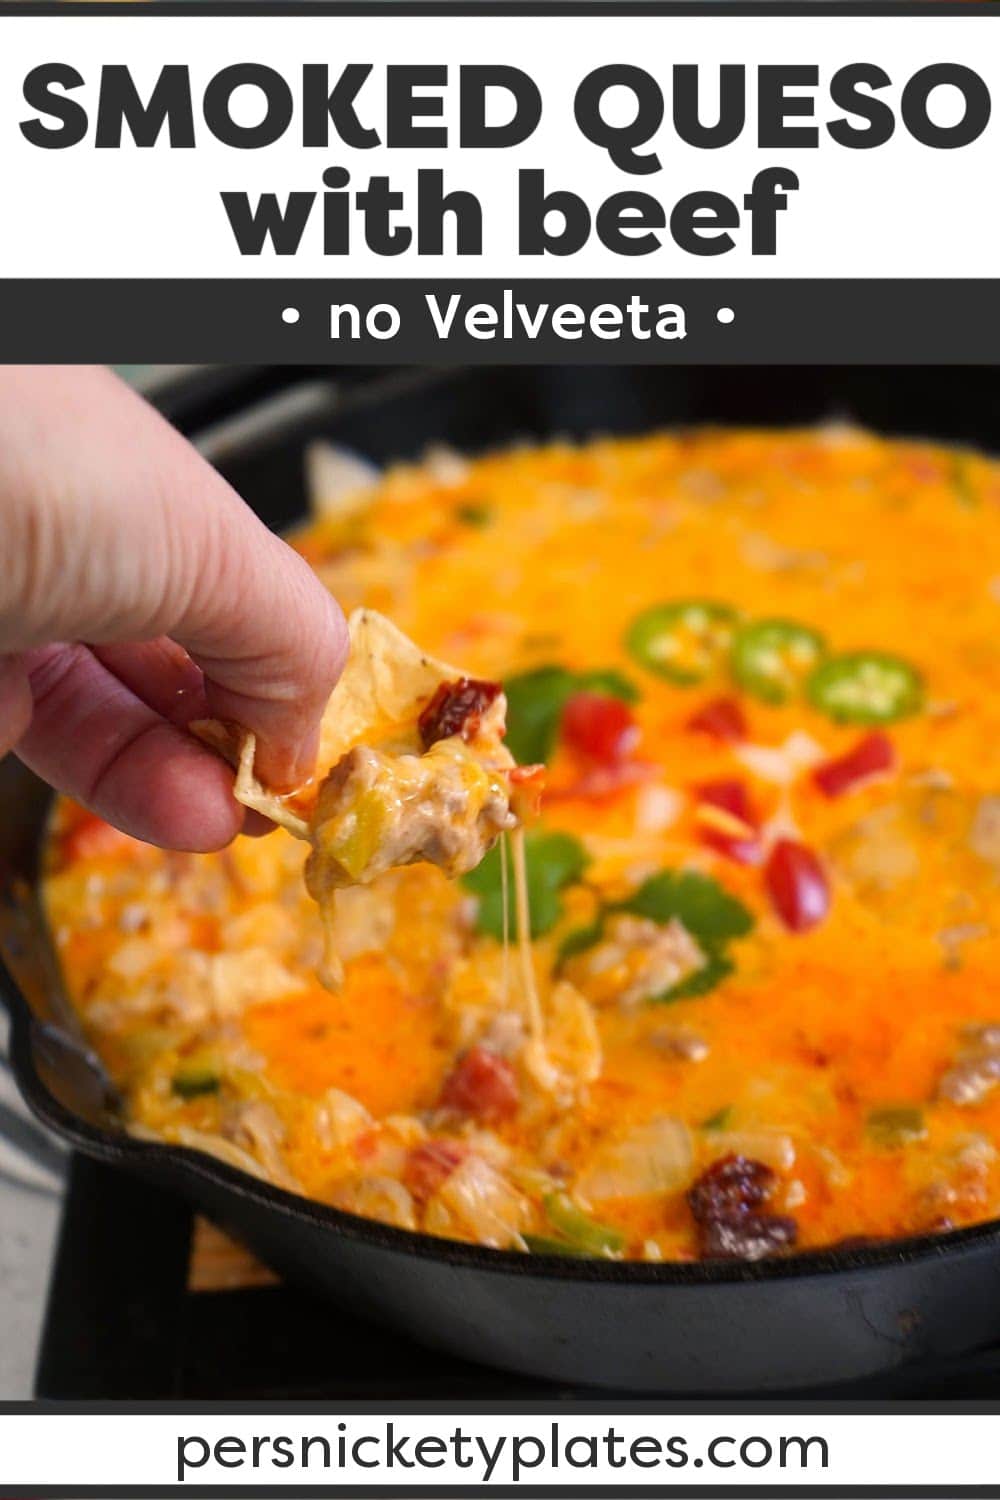 This smoked queso recipe with beef is made with two kinds of freshly grated real cheese and no Velveeta! Loads of ground beef, tomatoes, onions, and three kinds of peppers for heat are cooked low and slow in a flavor-infused smoker giving this ultimate queso dip tons of Mexican-inspired flavor. | www.persnicketyplates.com